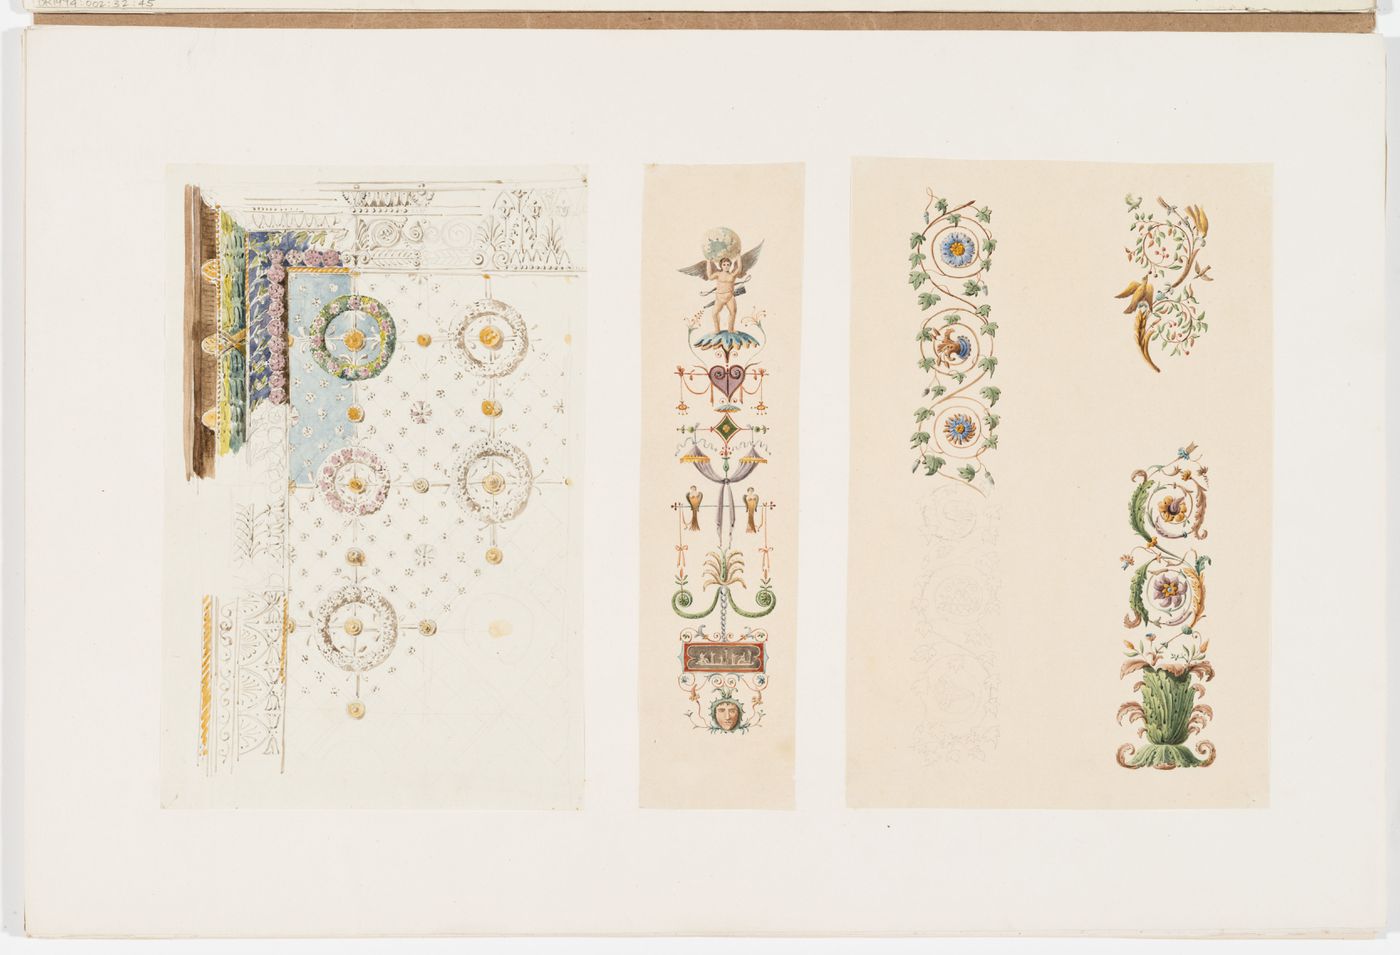 Ornament drawings of a panel decorated with foliage and wreaths, a vertical band decorated with grotesques, and three rinceaux